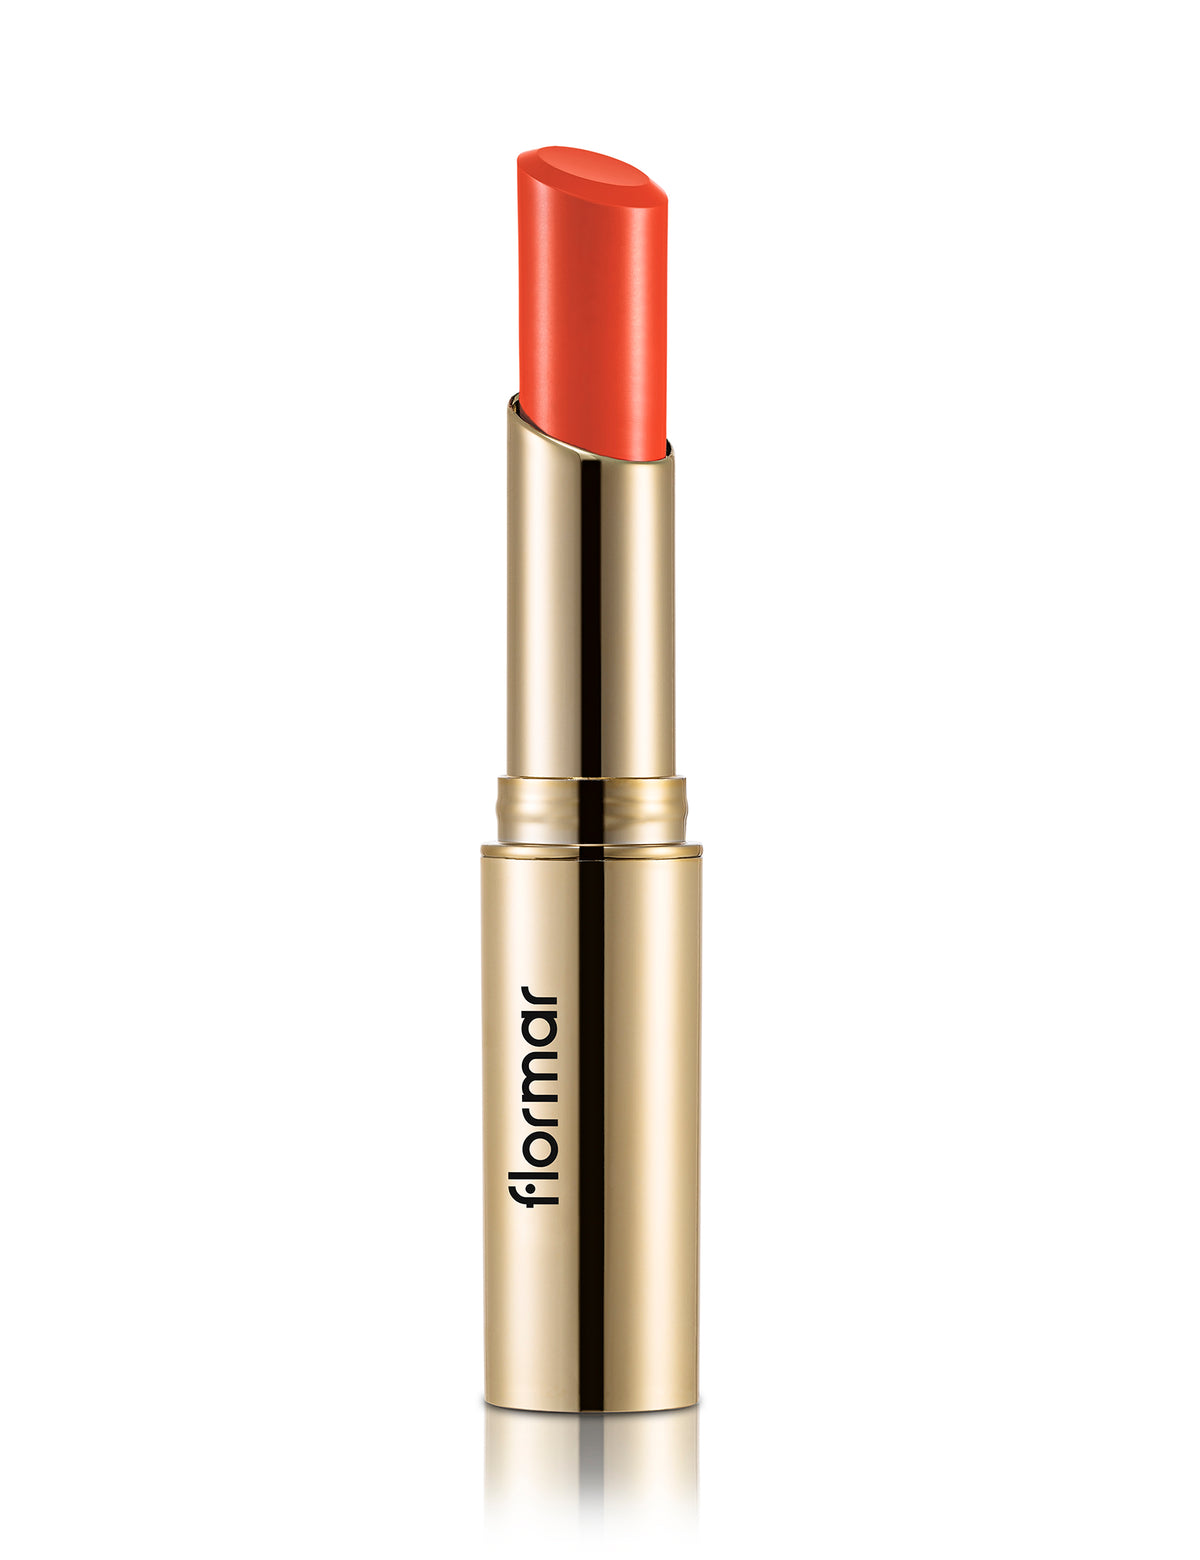 Flormar Deluxe Cashmere Stylo Lipstick - 22 Red In Flames